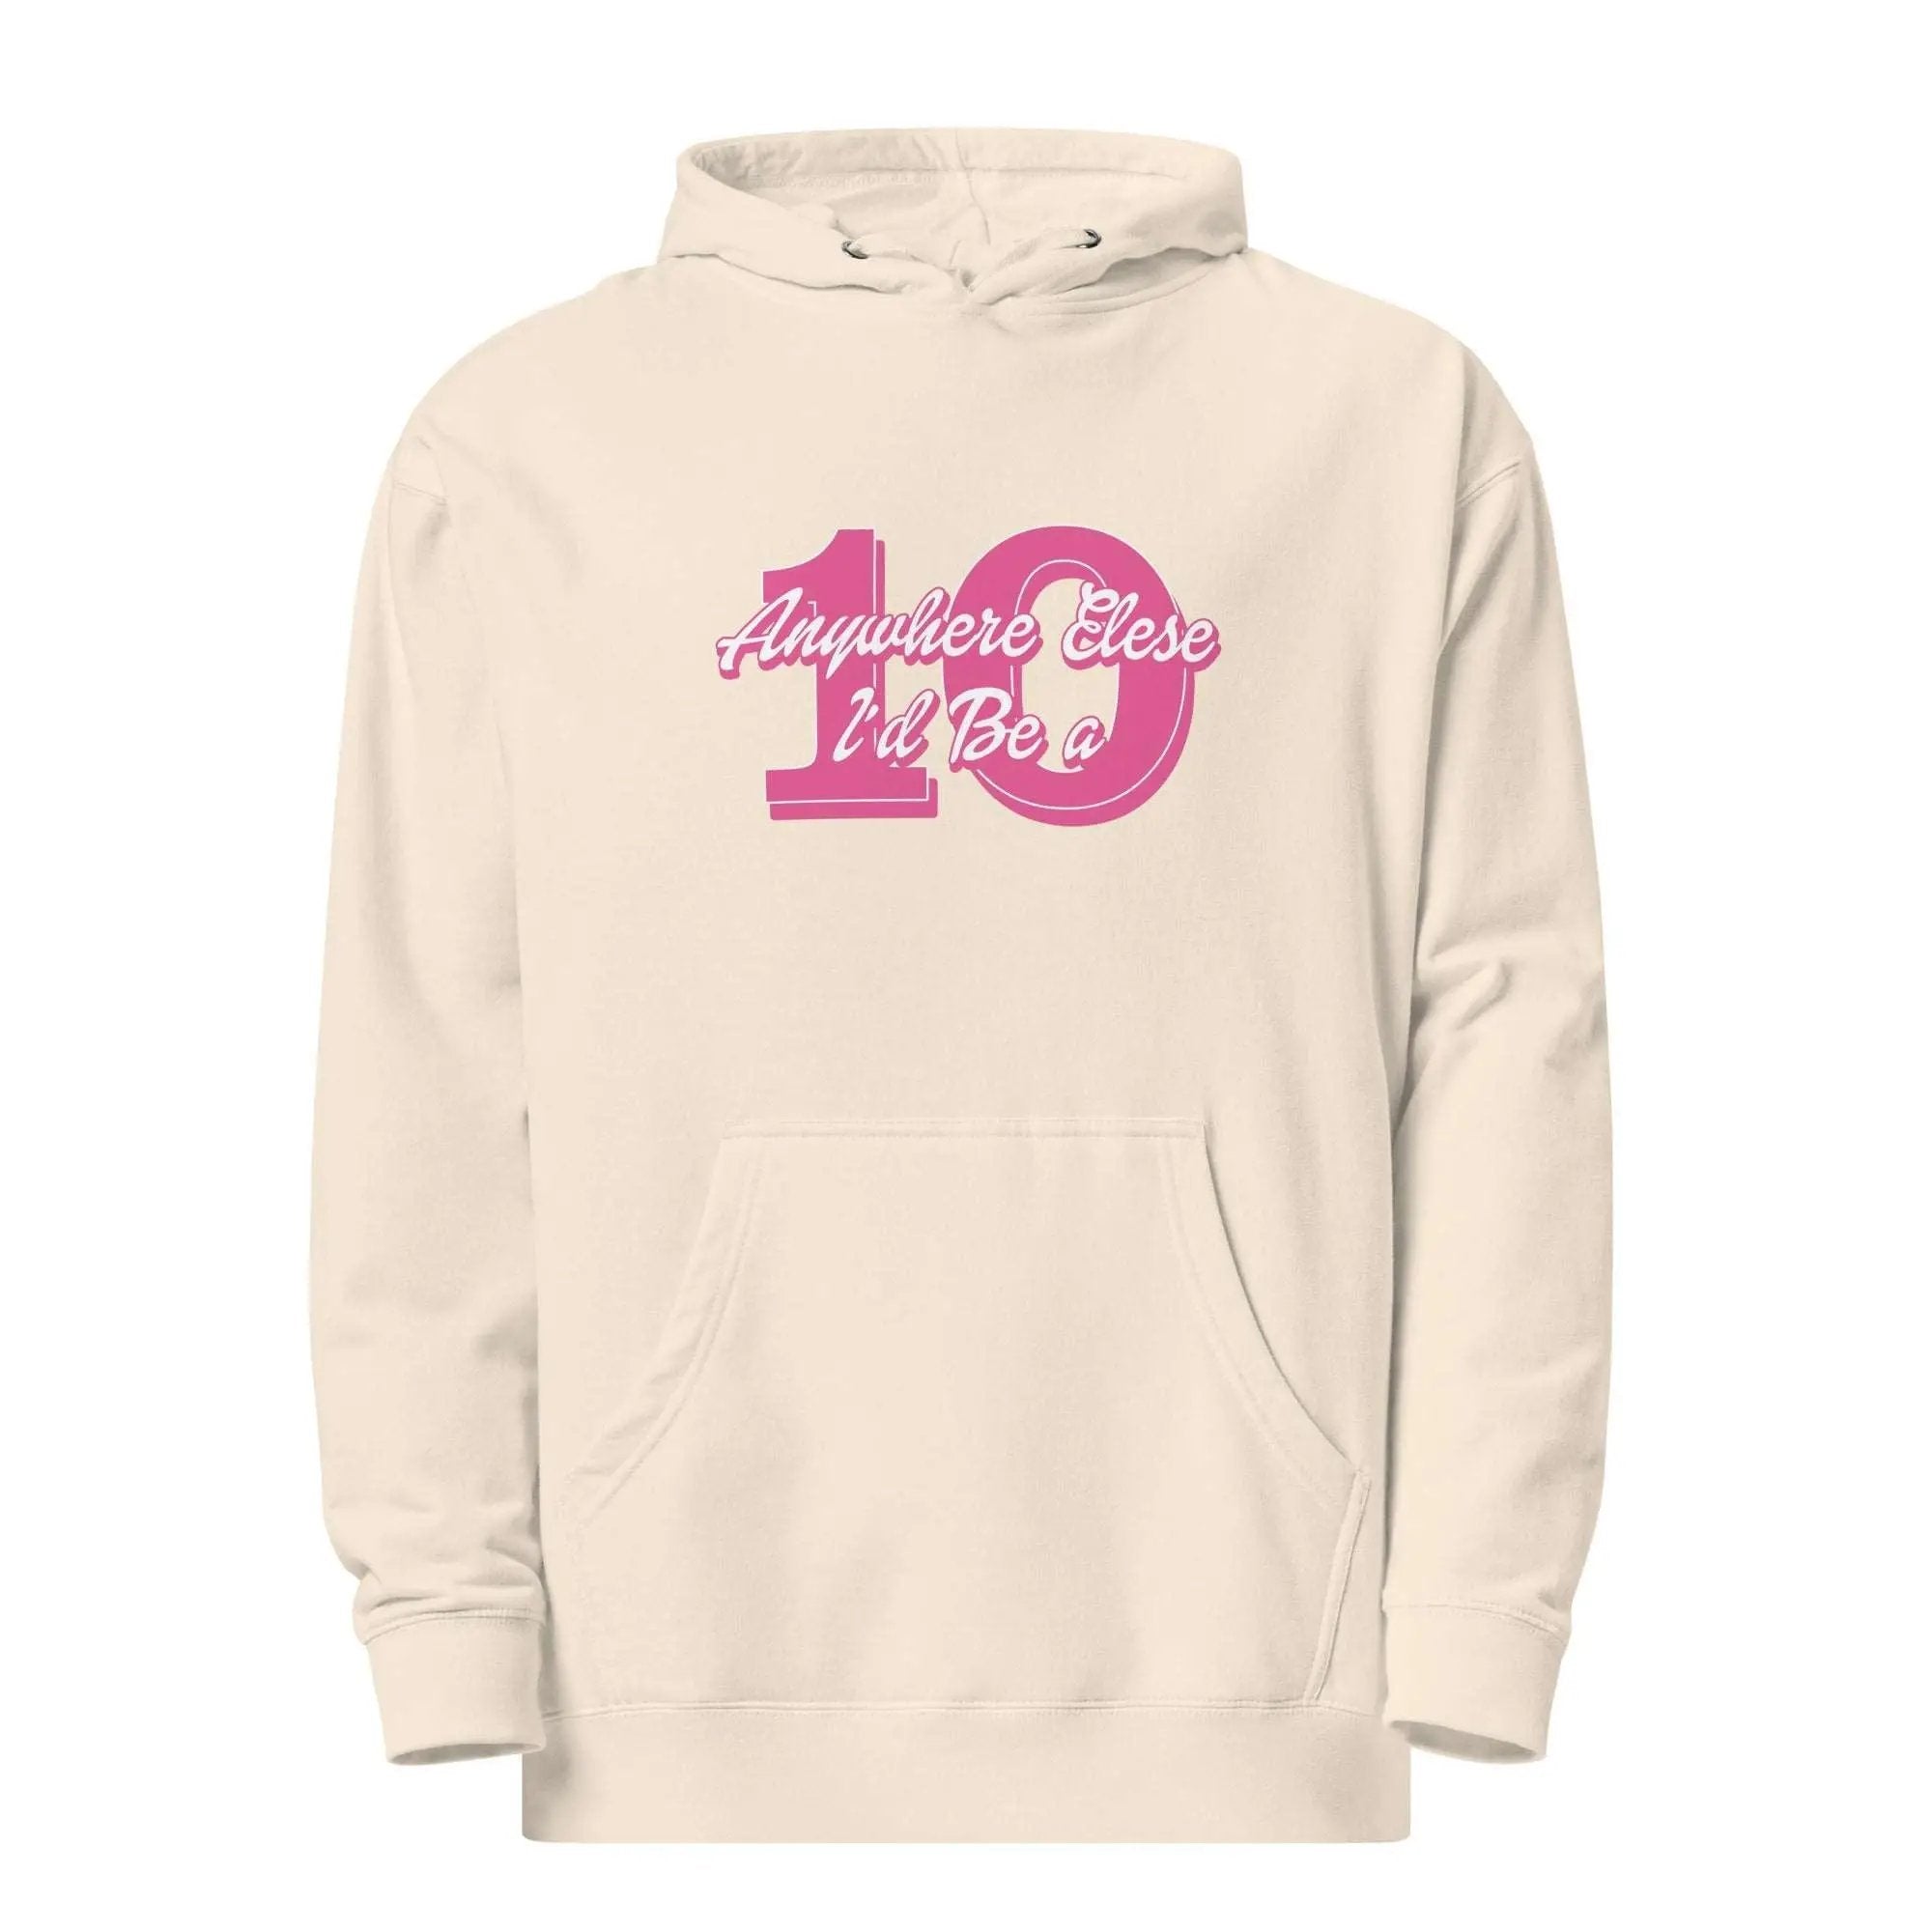 Anywhere Else I’d Be a 10 Unisex midweight hoodie